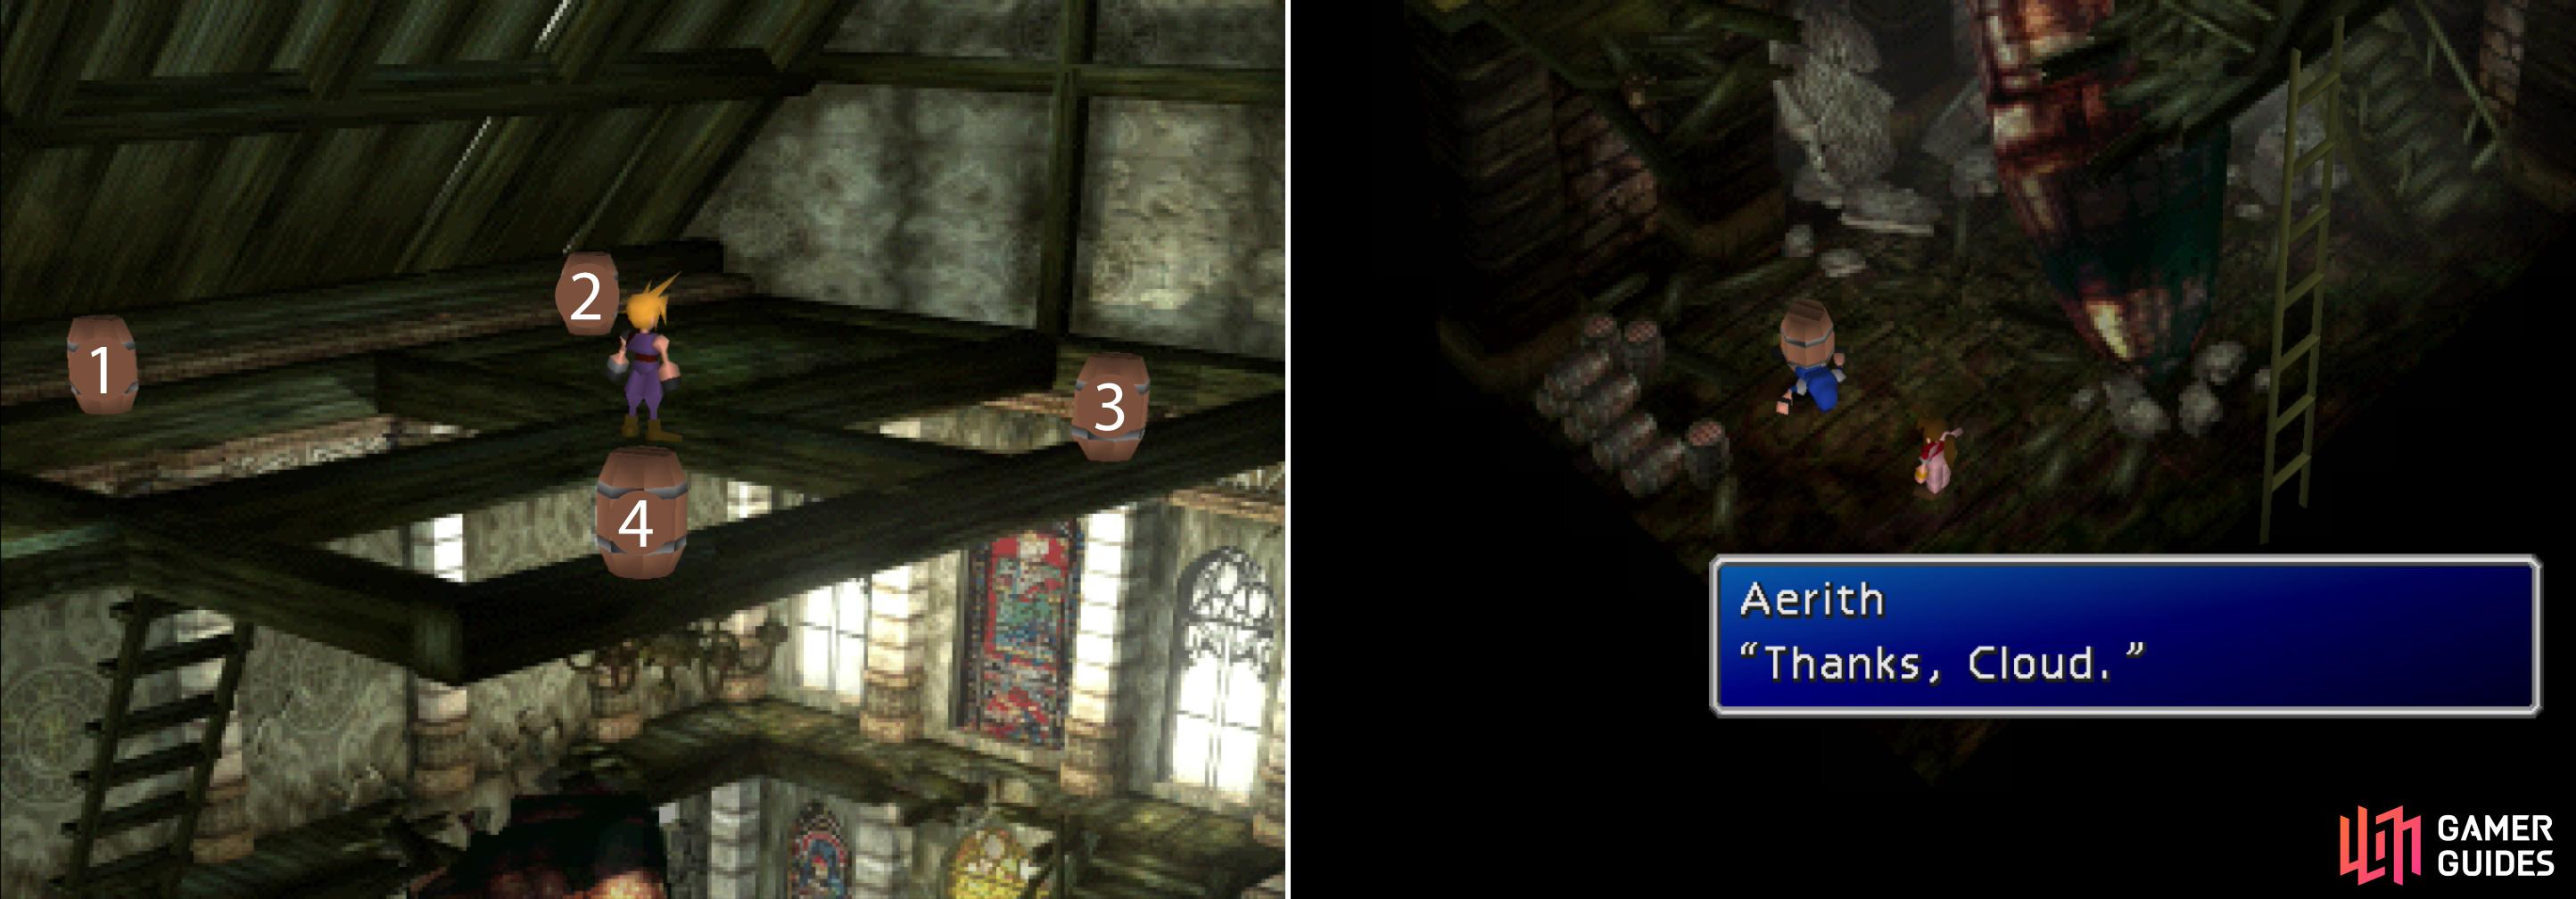 Push the barrels over in the correct order to thwart Shinra's pursuit (left) and earn Aeris's gratitude (right).